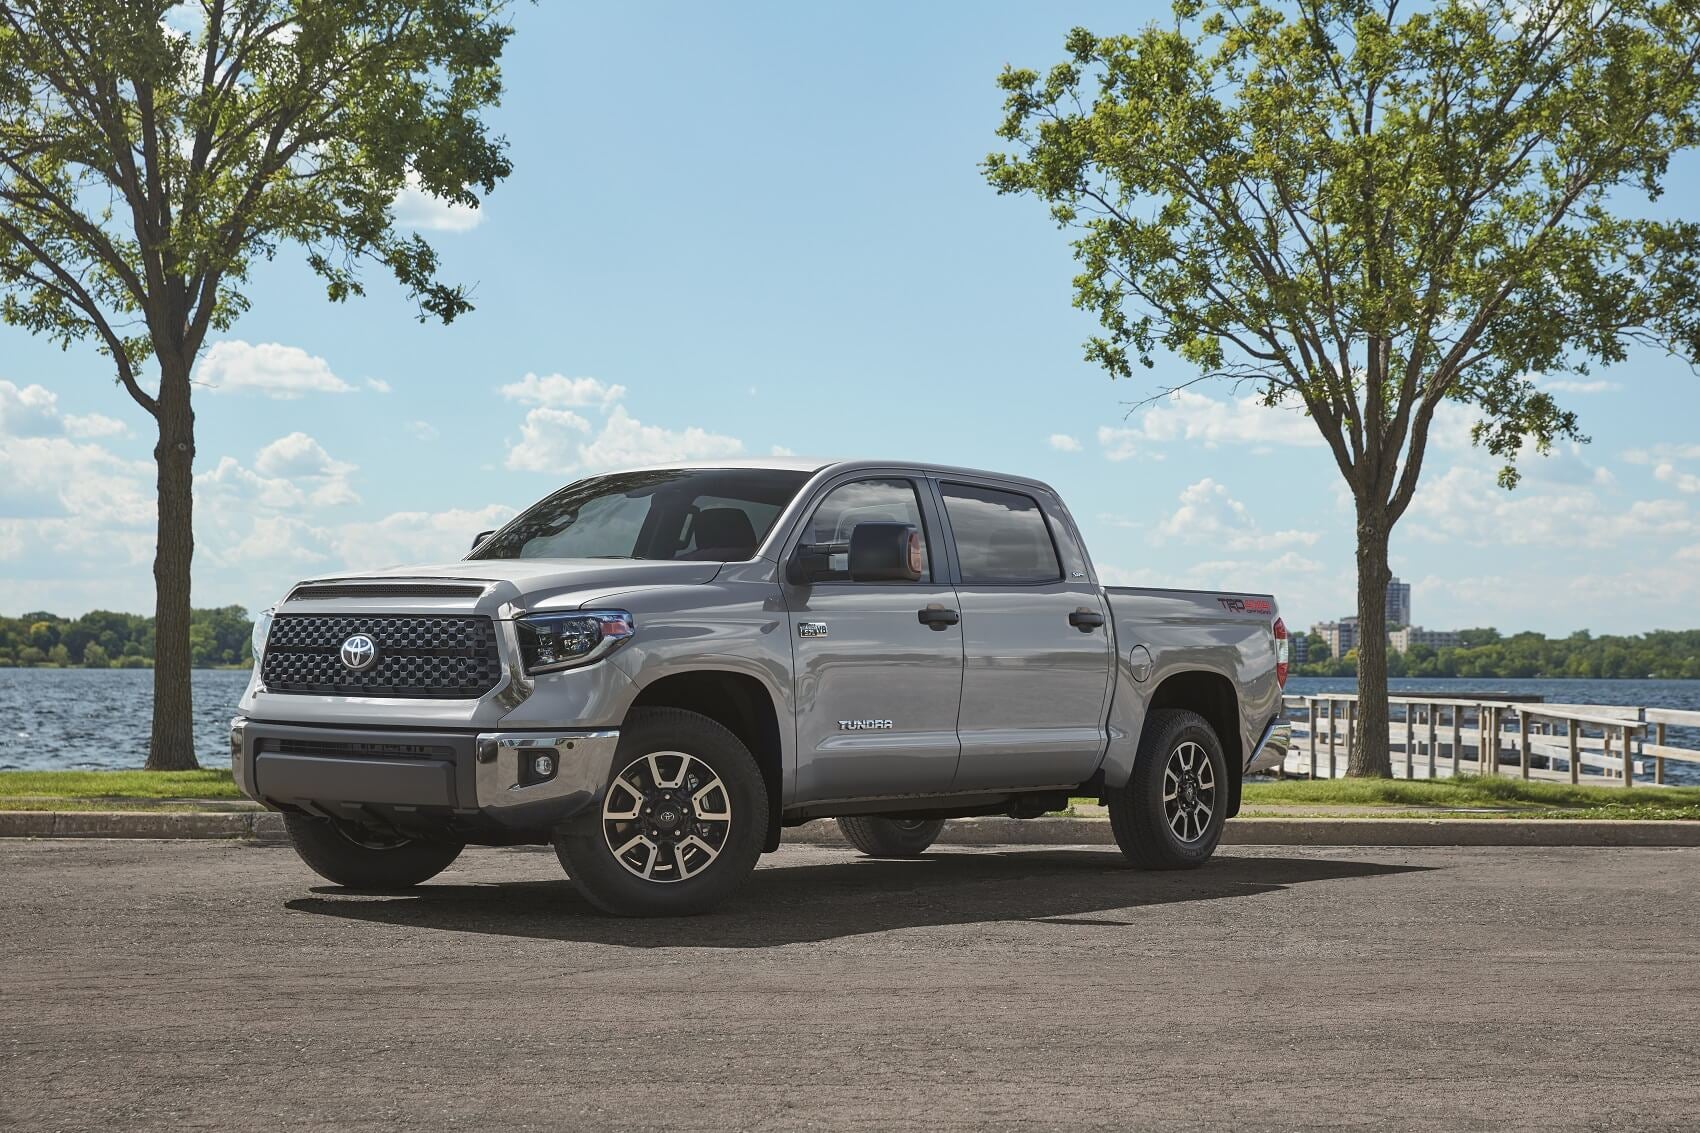 Toyota Tundra for Sale near The Villages FL | Phillips Toyota